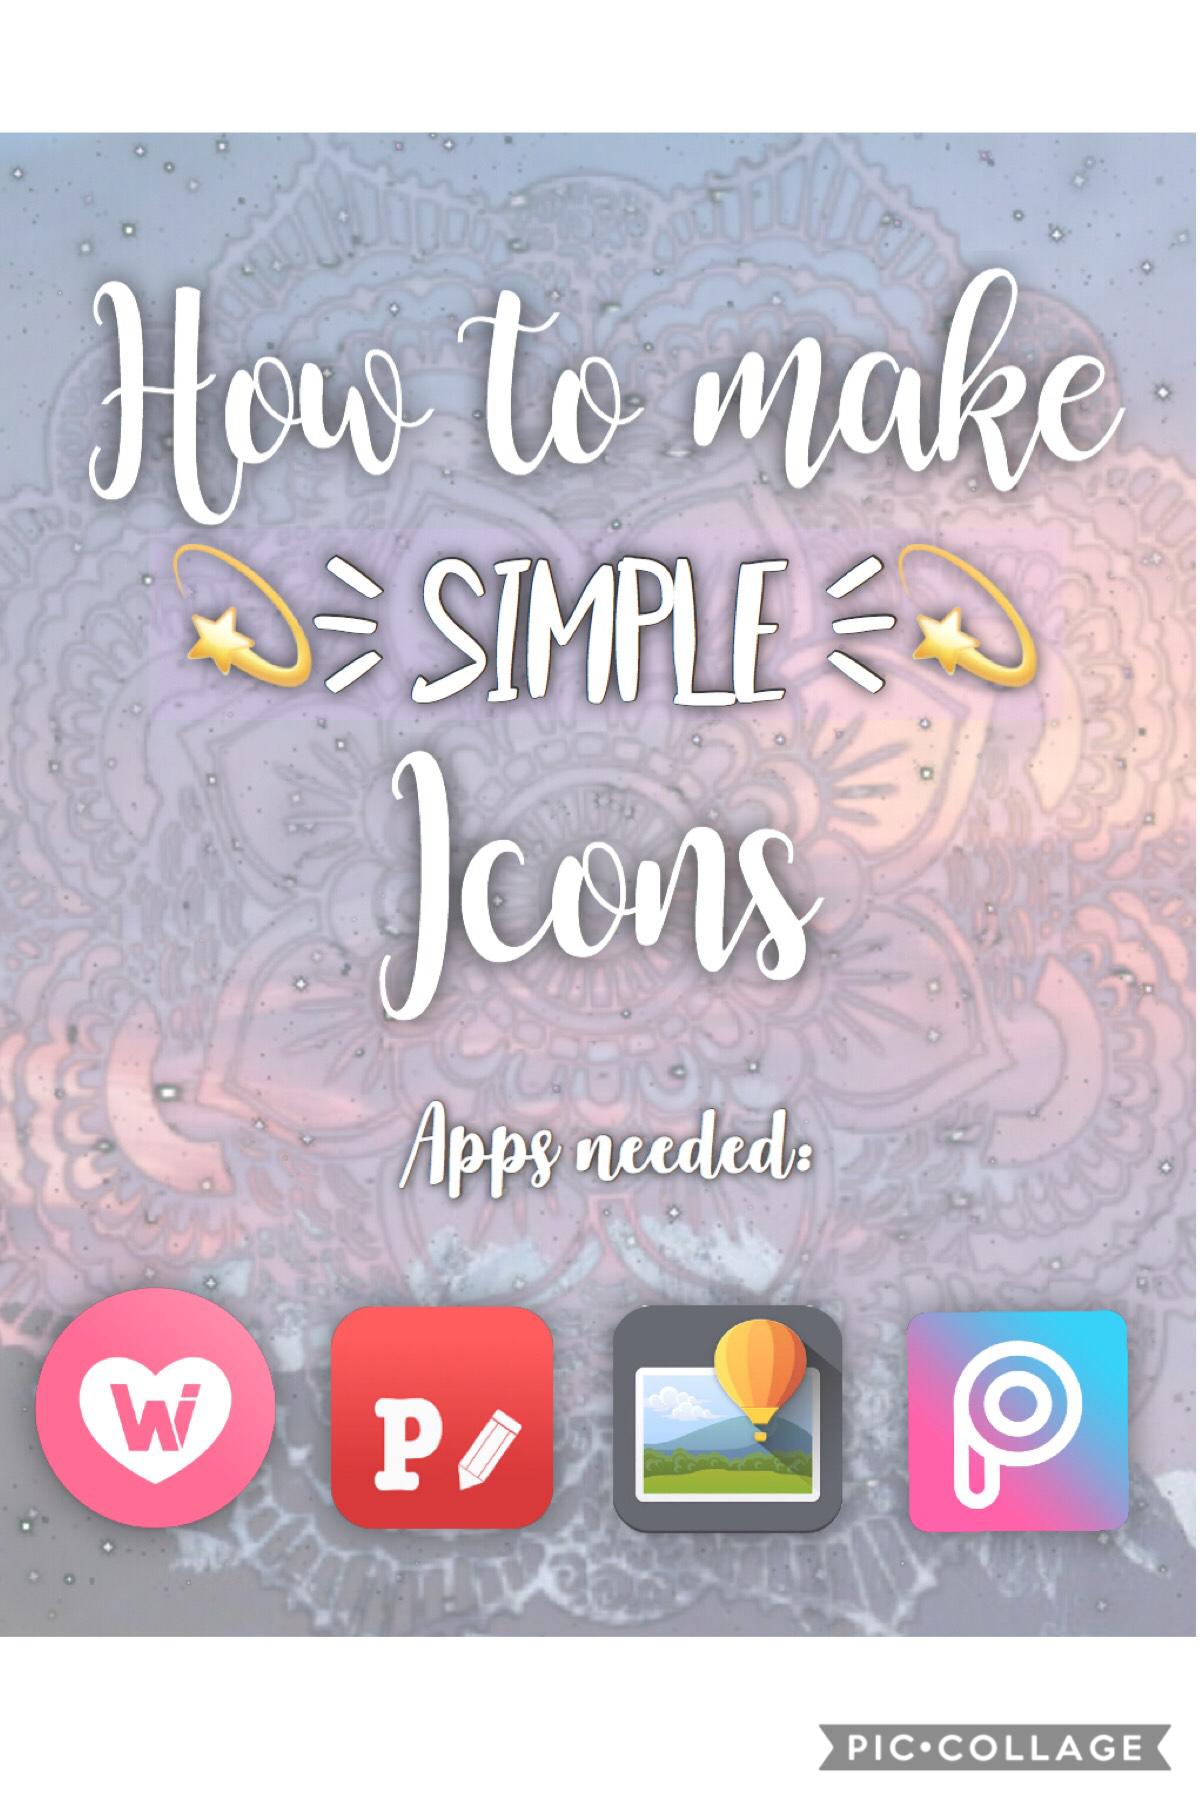 💫 How to make a simple icon (6 steps) 💫